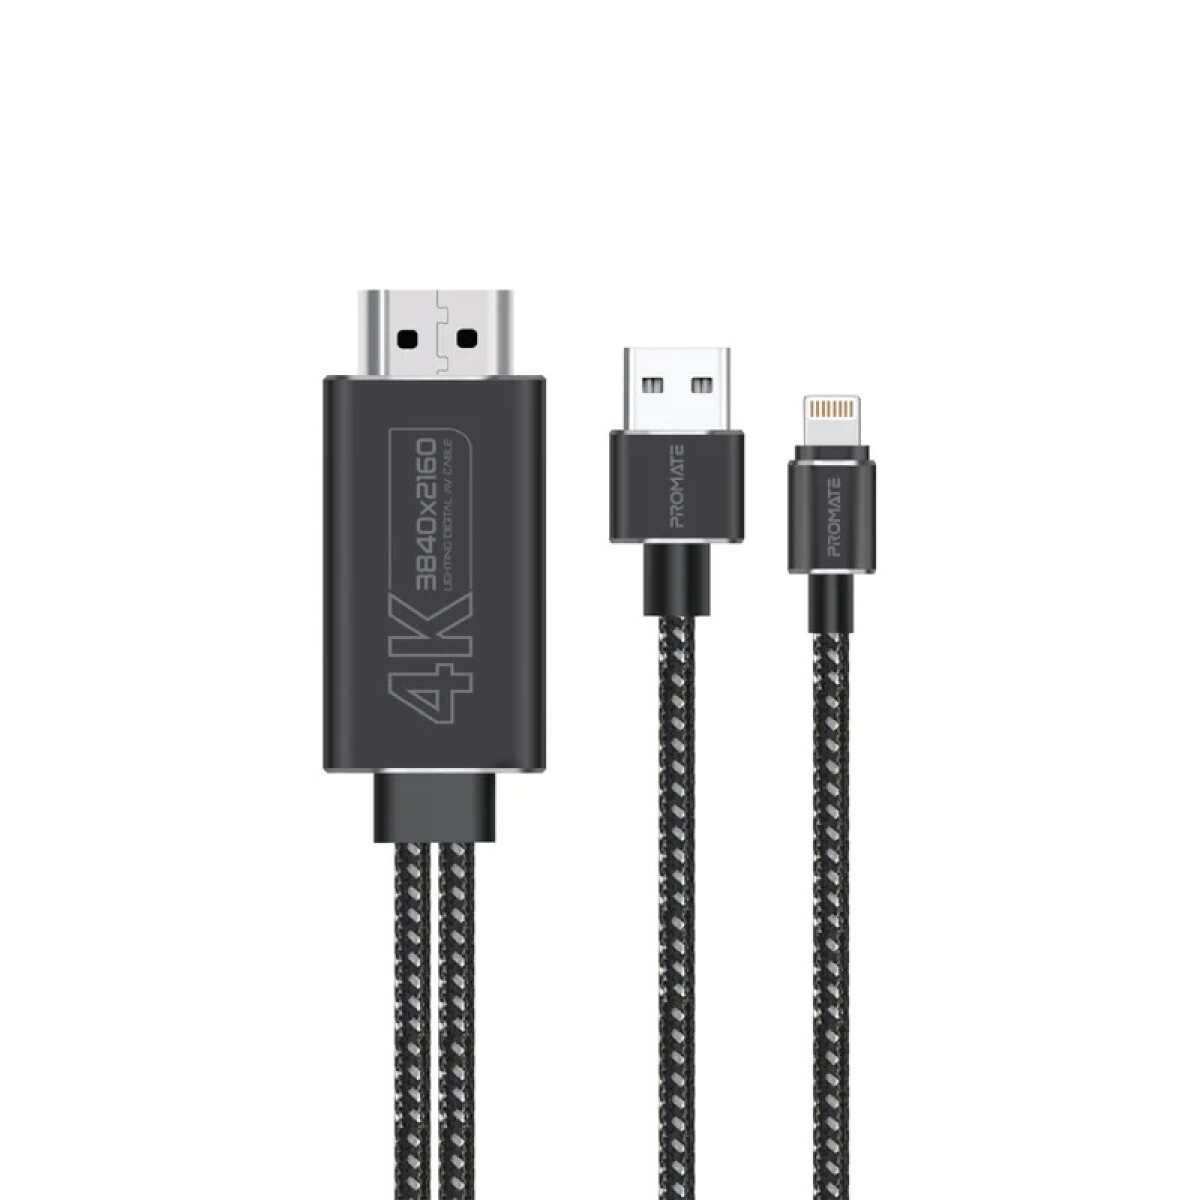 PROMATE MEDIALINK CABLE PARA LIGHTNING A HDMI 4K C/CABLE USB - Promate Medialink Cable Para Lightning A Hdmi 4k C/cable Usb 